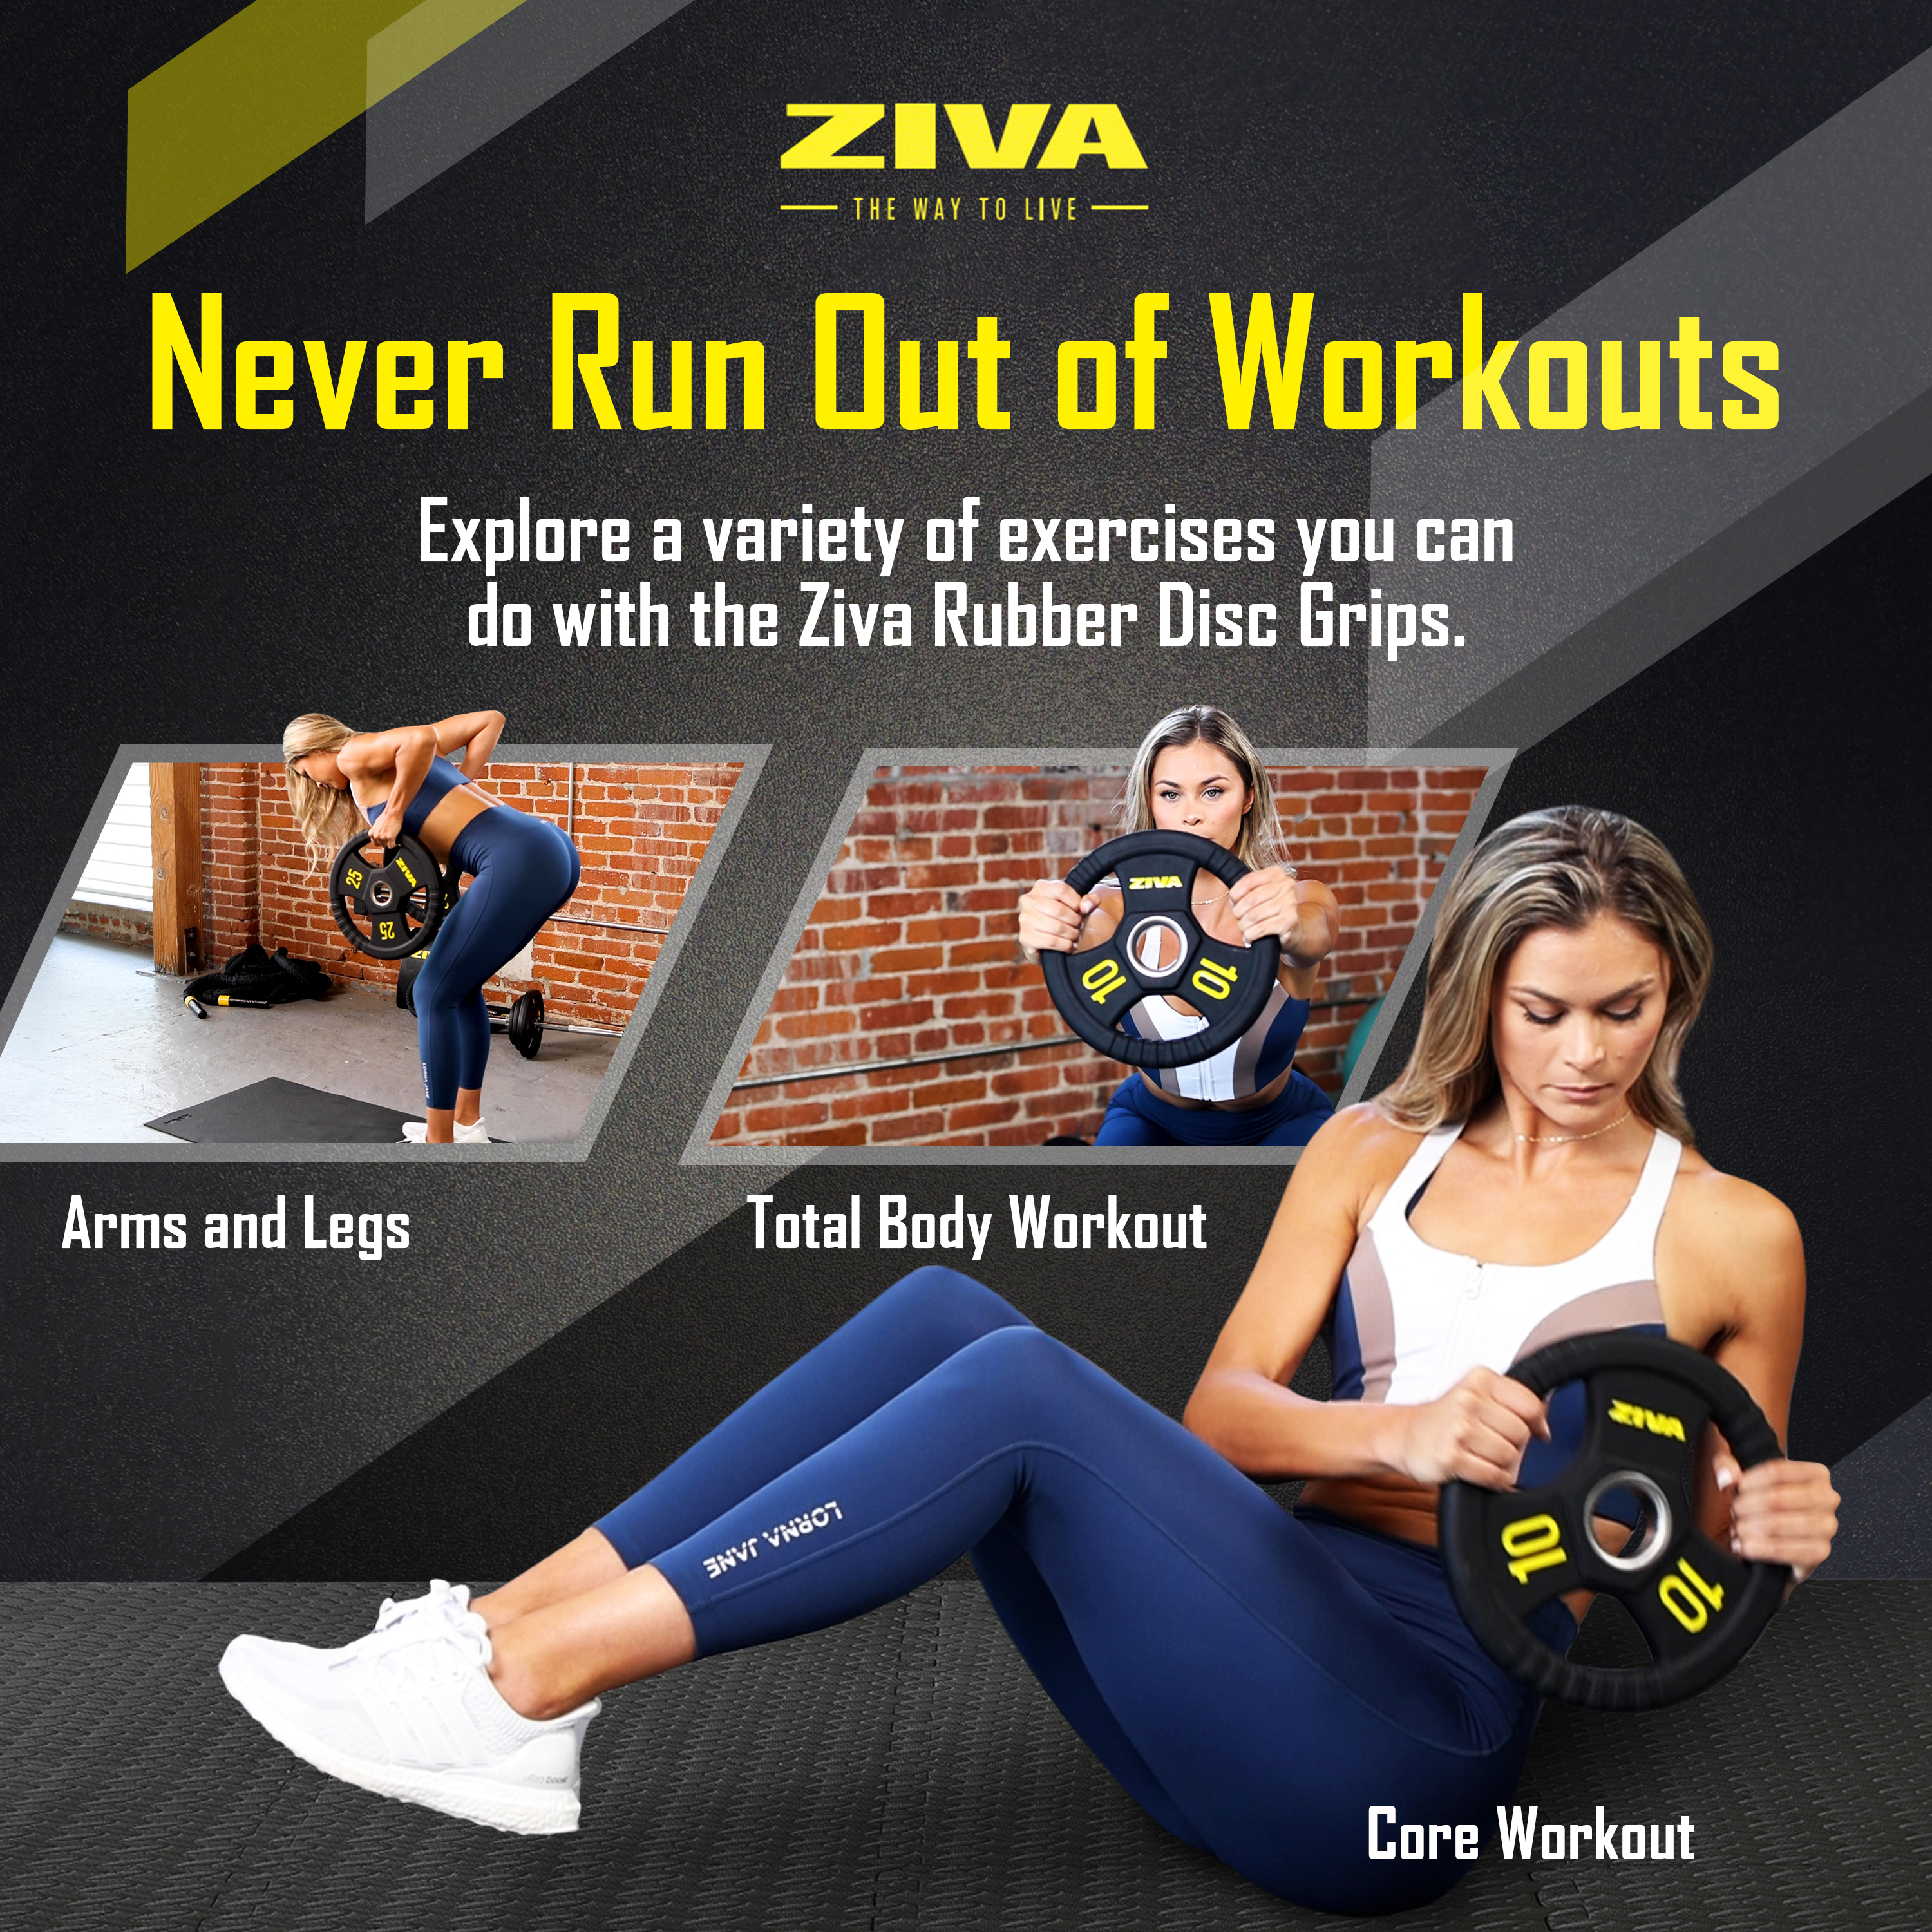 Never run out of workouts. Explore a variety of exercises you can do with the Ziva rubber disc grips. Arm and legs. Total body workout. Core workout.